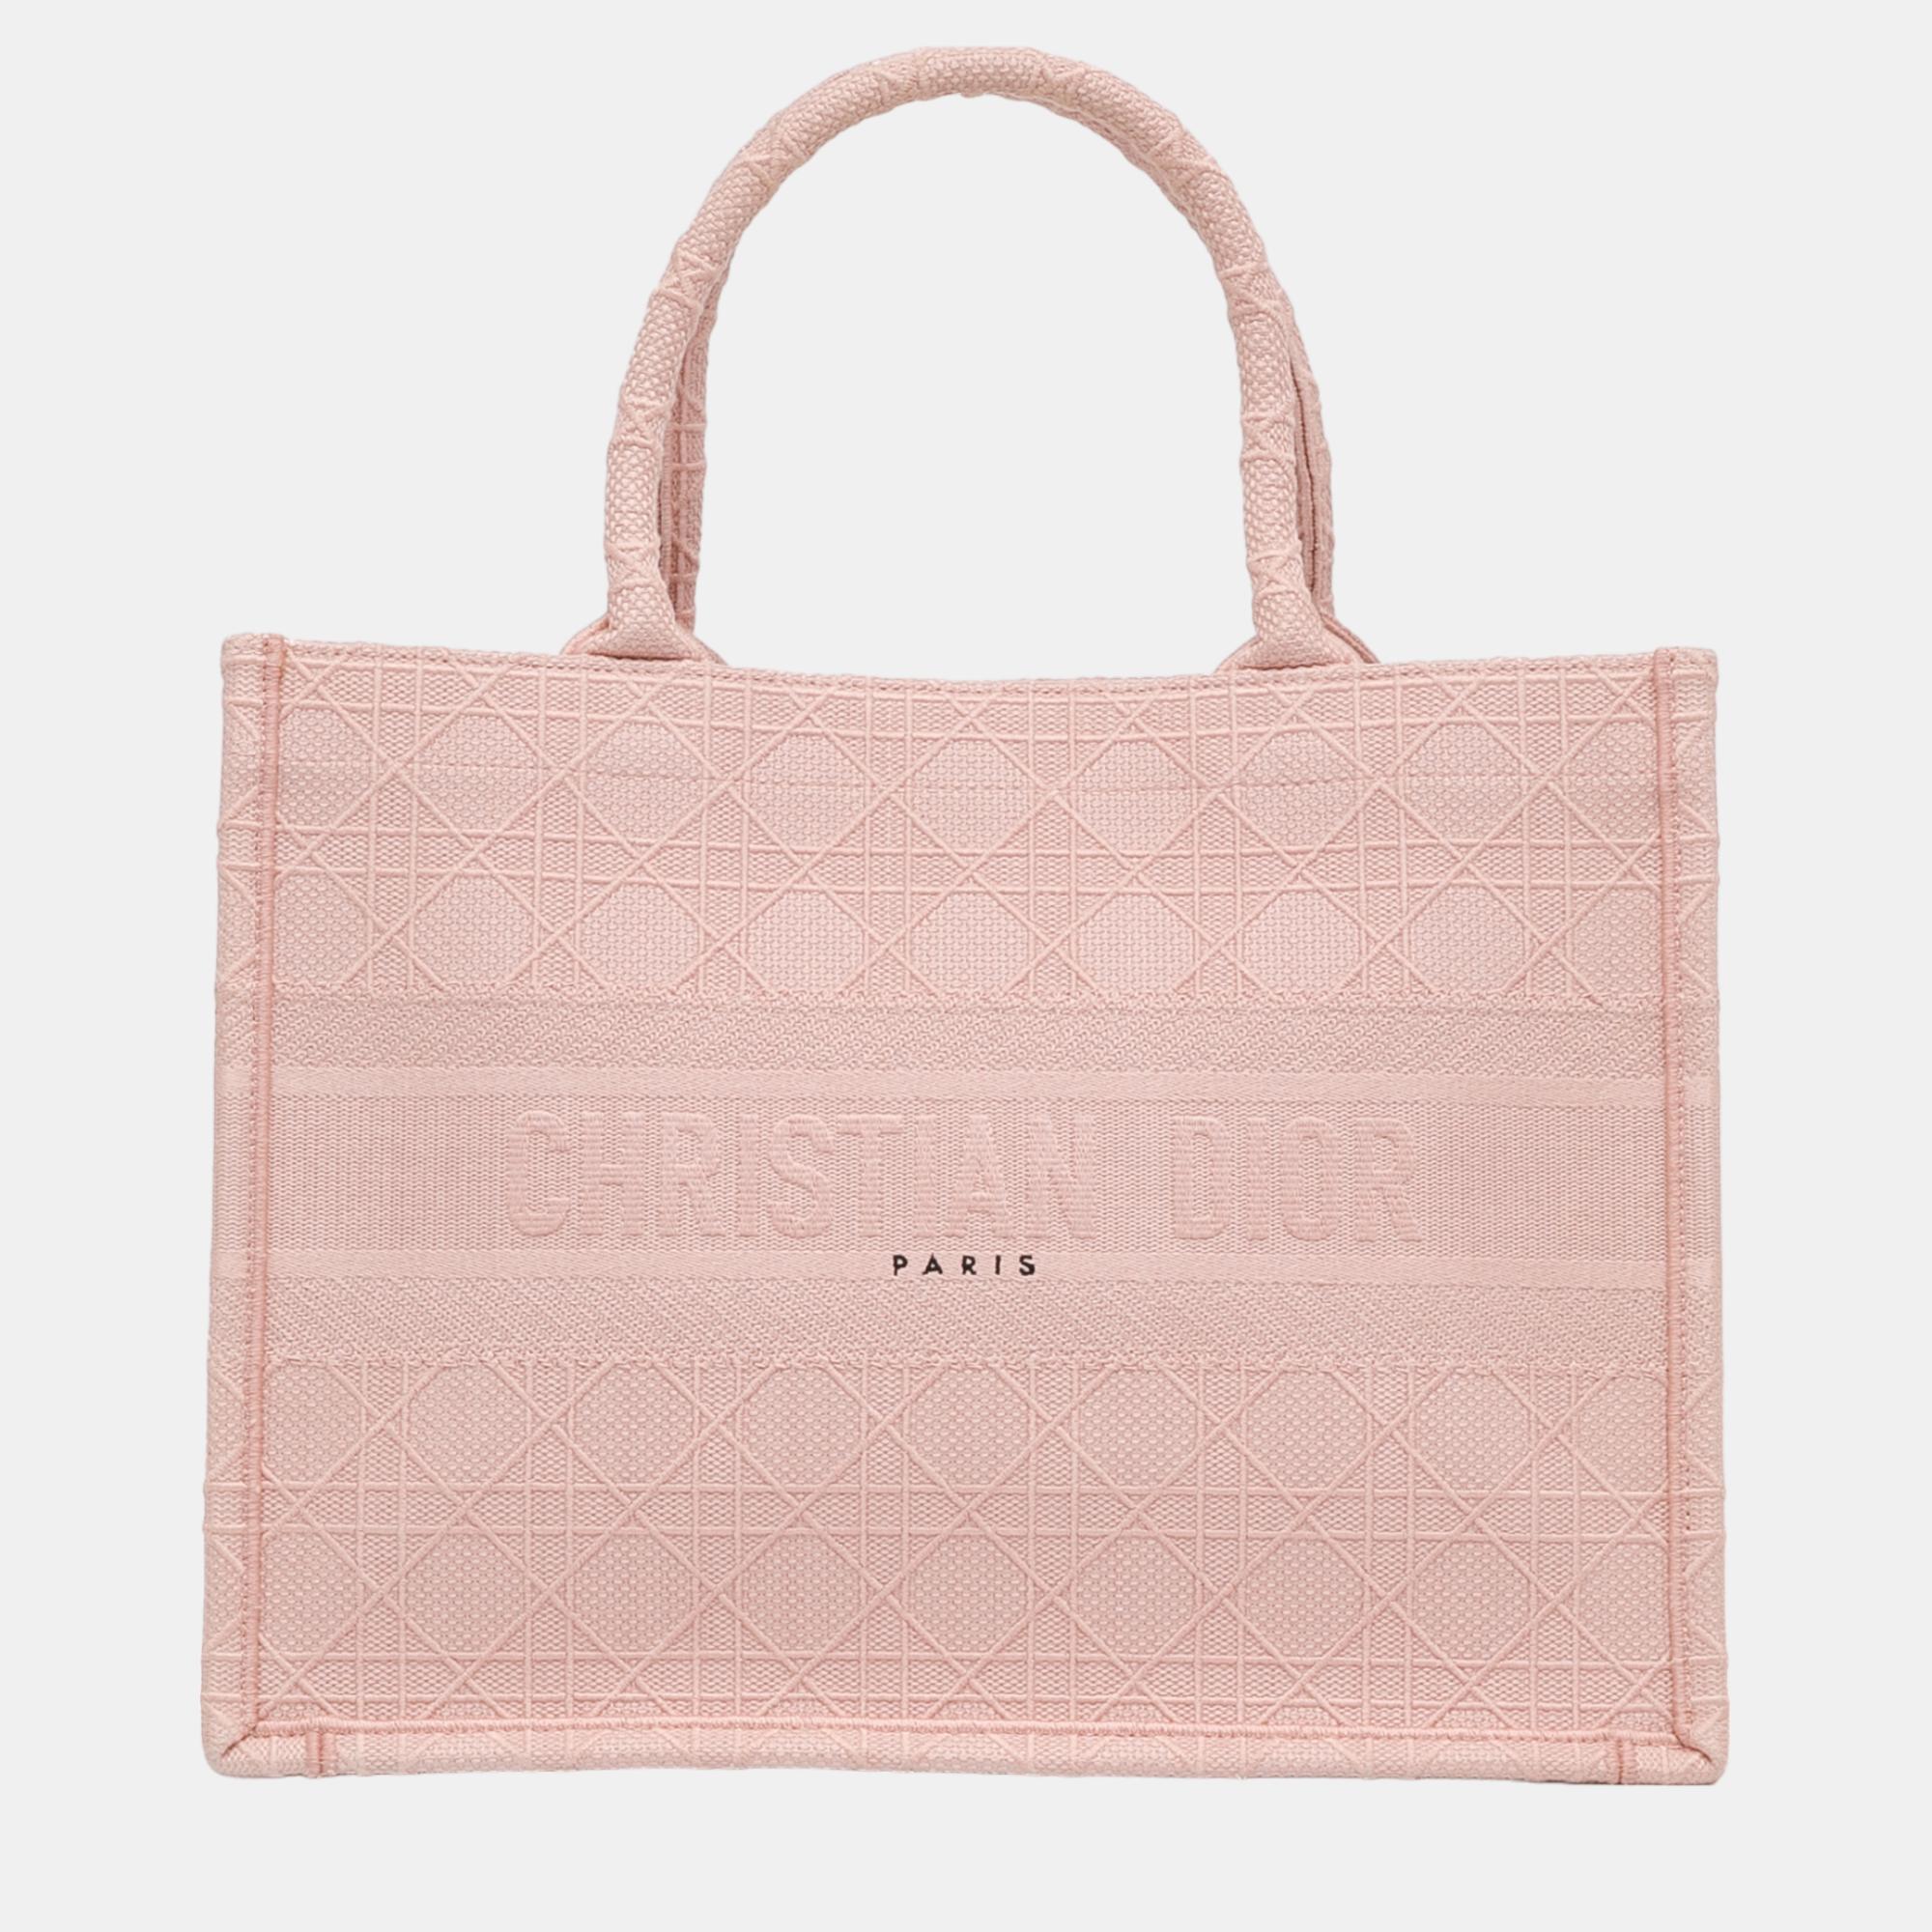 Dior pink medium cannage embroidered book tote